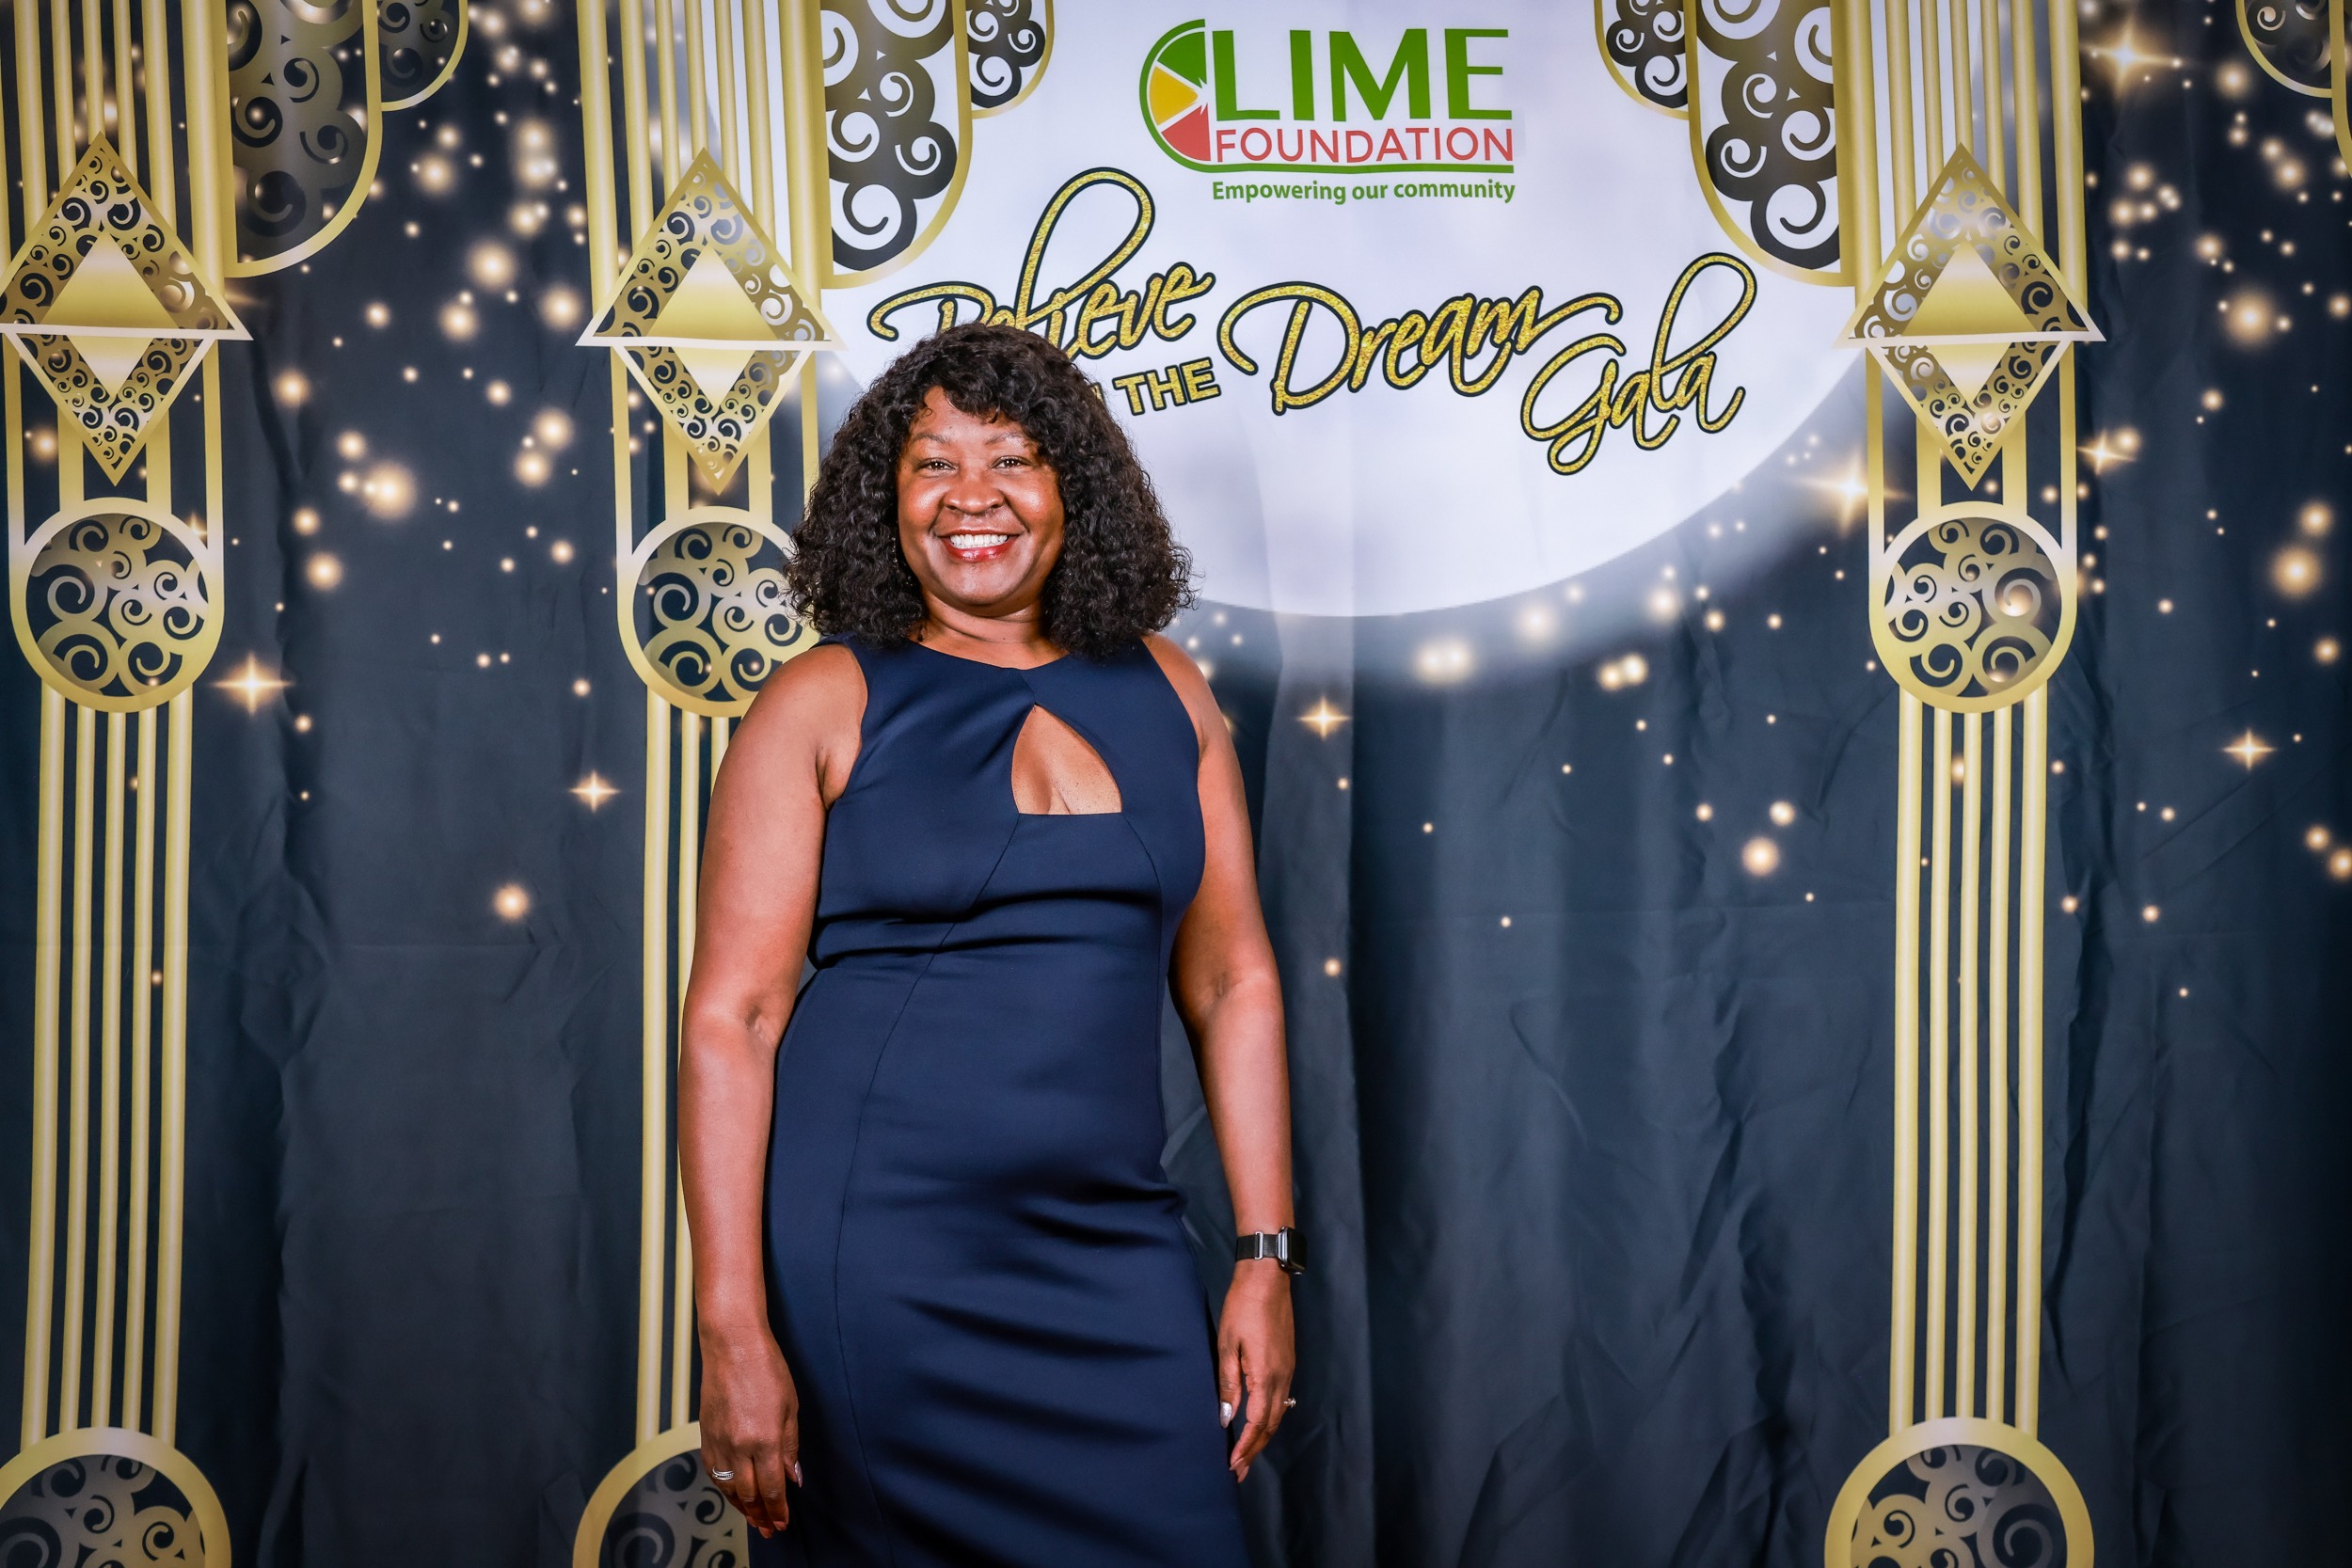 A woman in a black dress standing in front of The LIME Foundation backdrop.